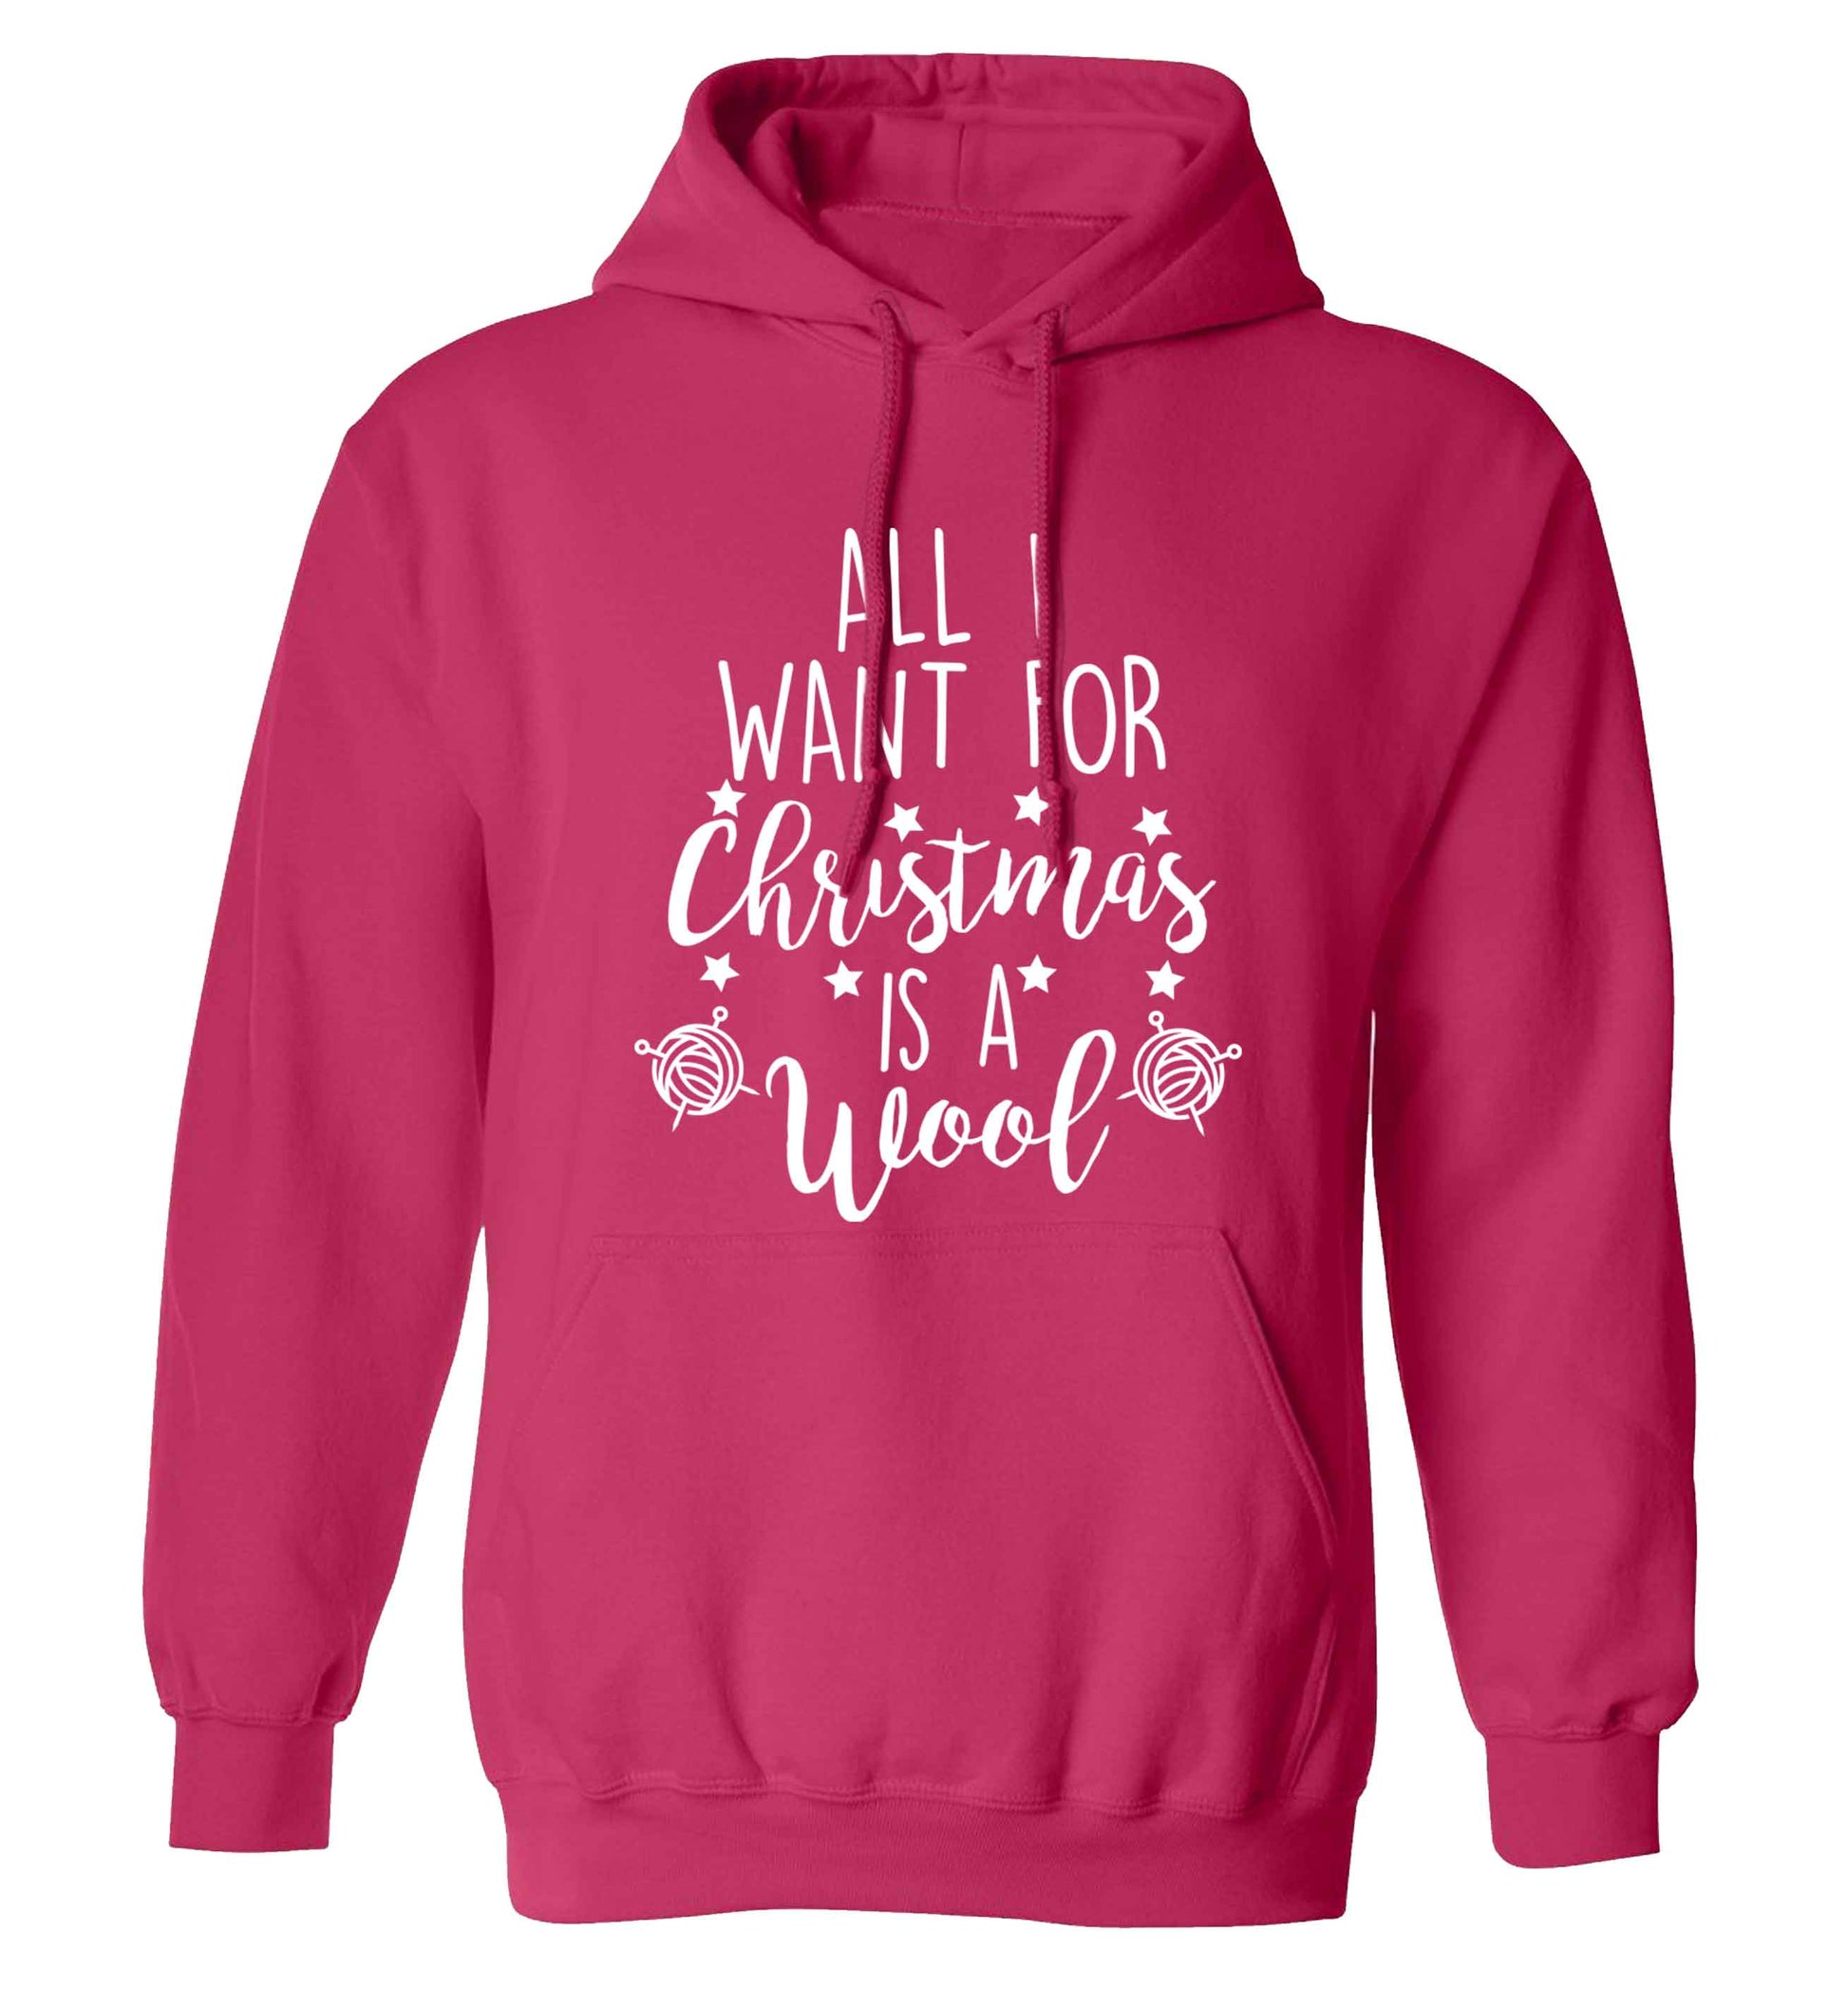 All I want for Christmas is wool! adults unisex pink hoodie 2XL